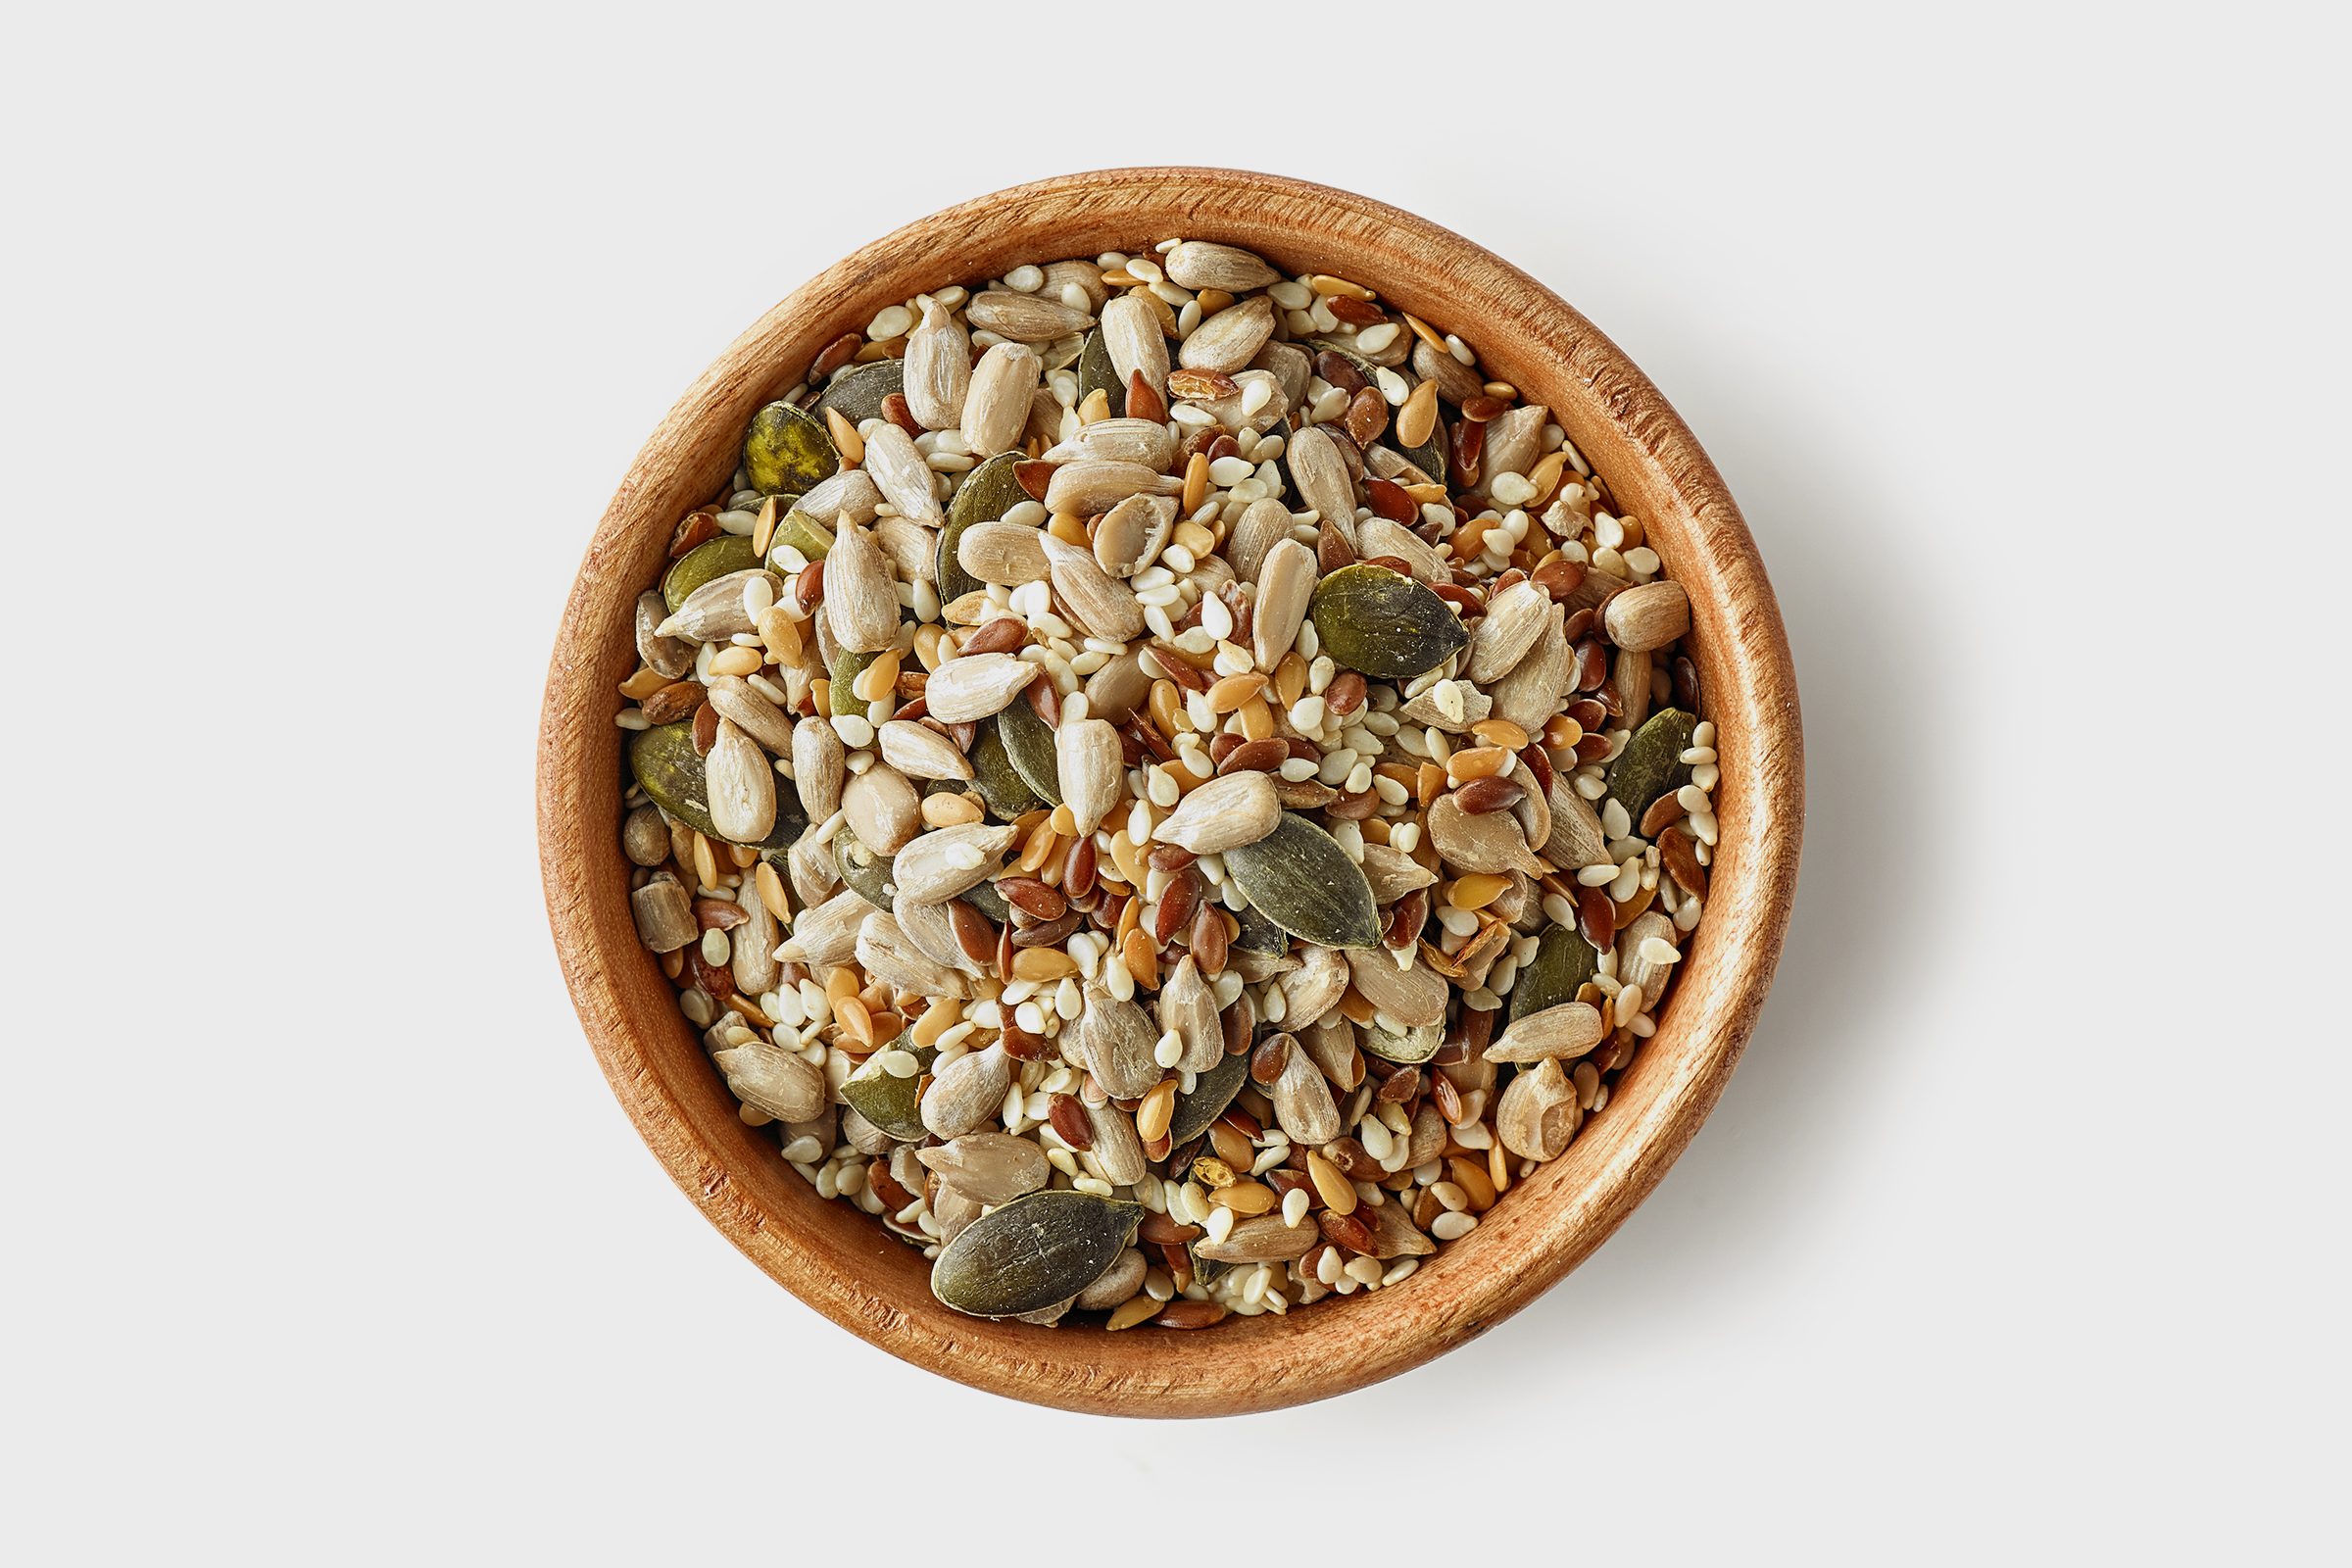 bowl of various seeds on white background